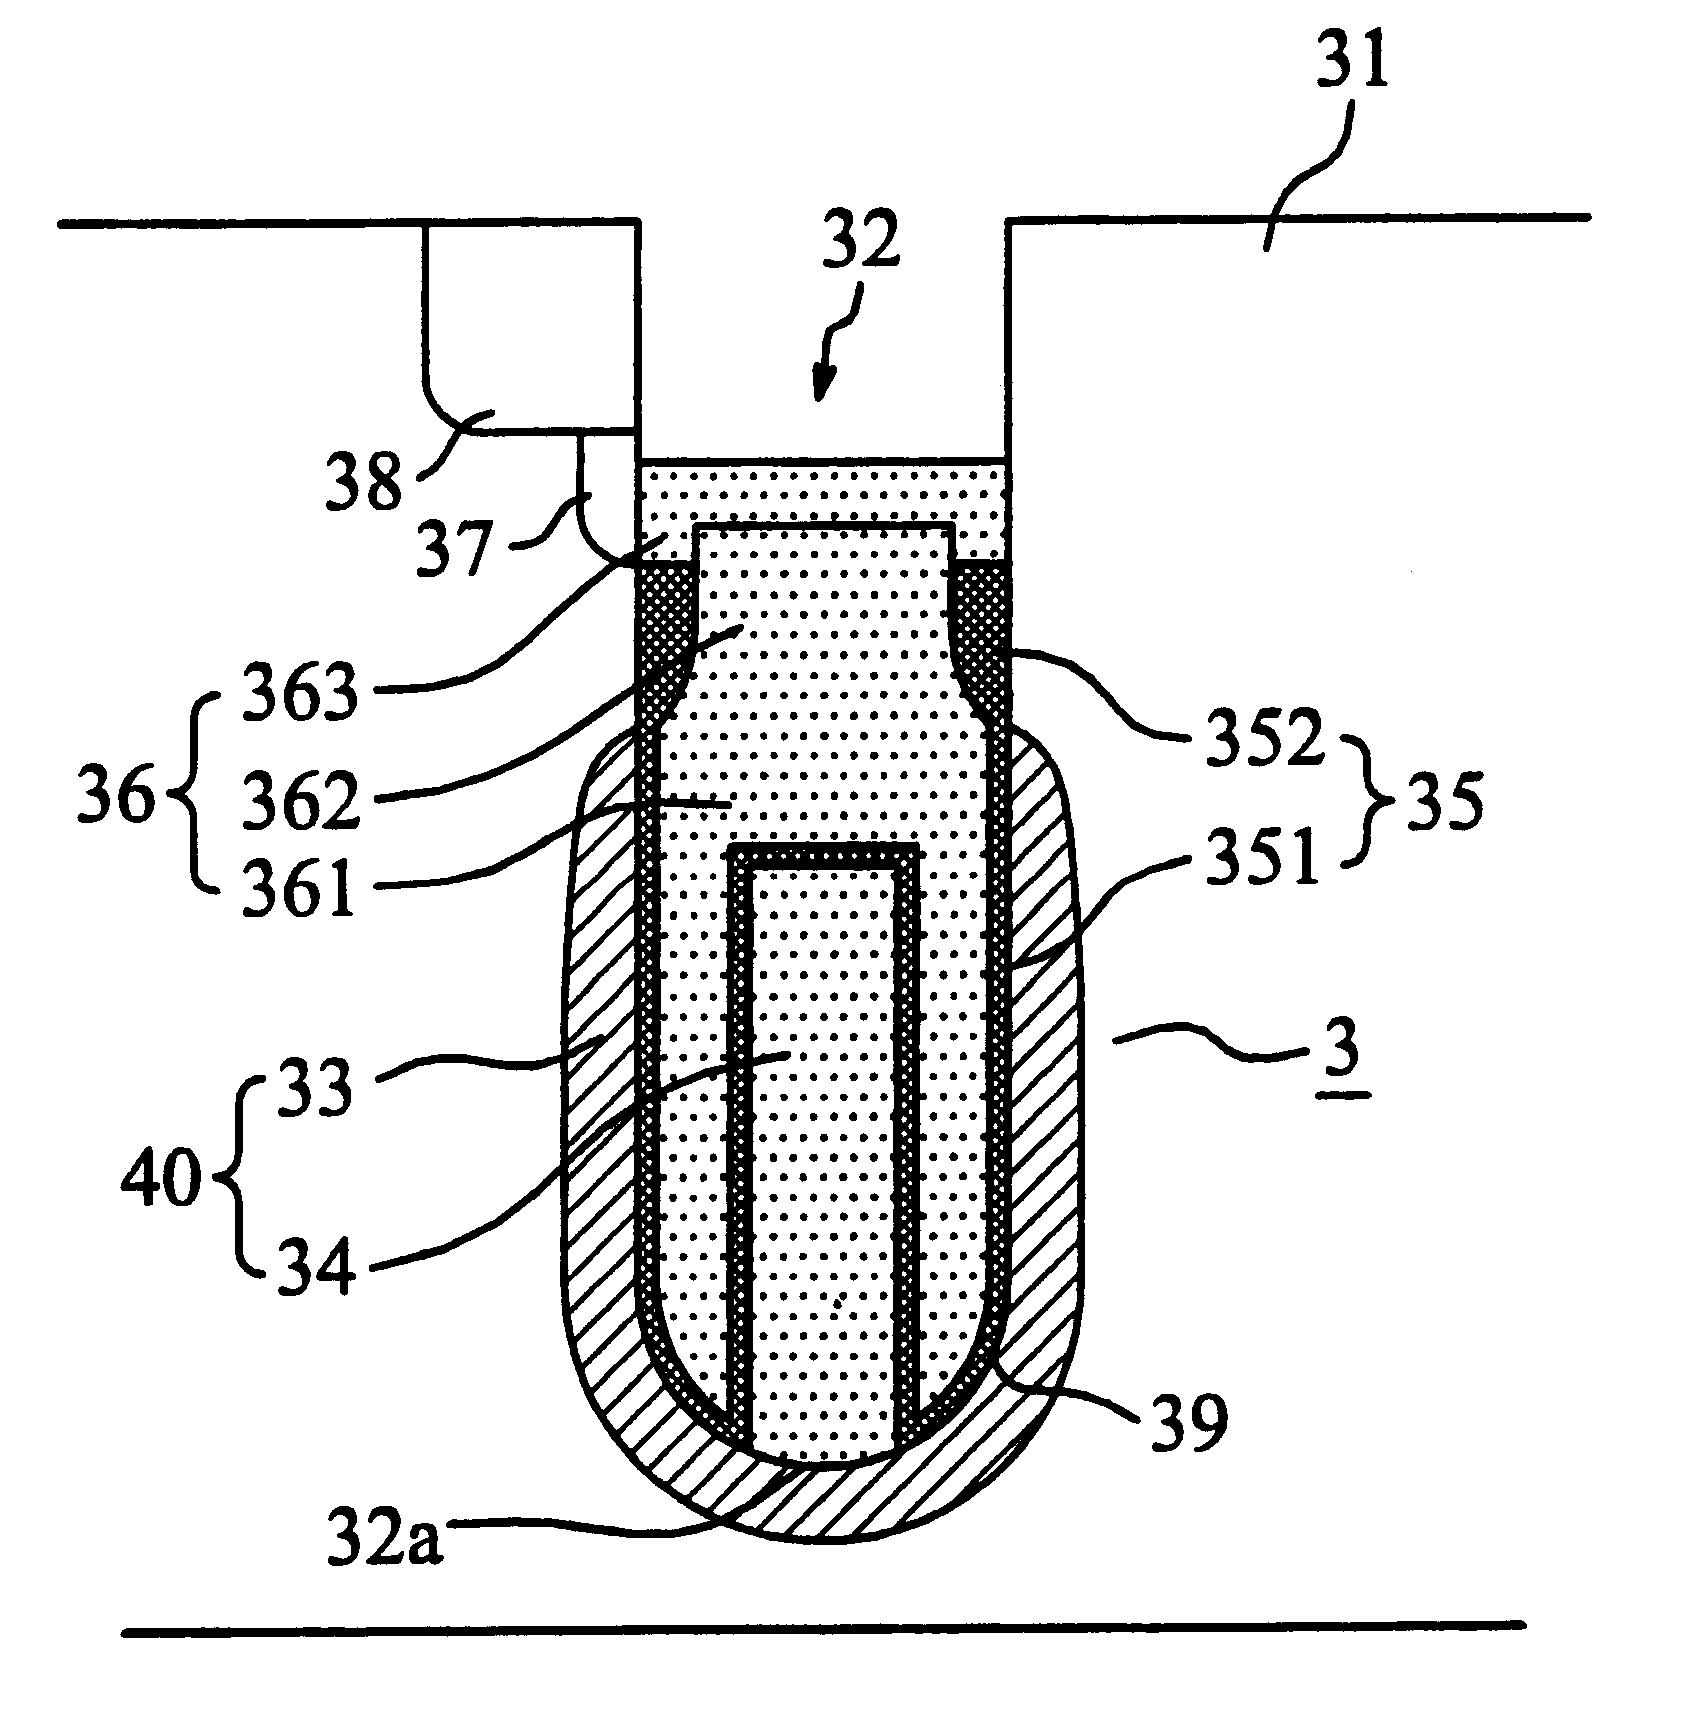 Method of fabricating a trench capacitor